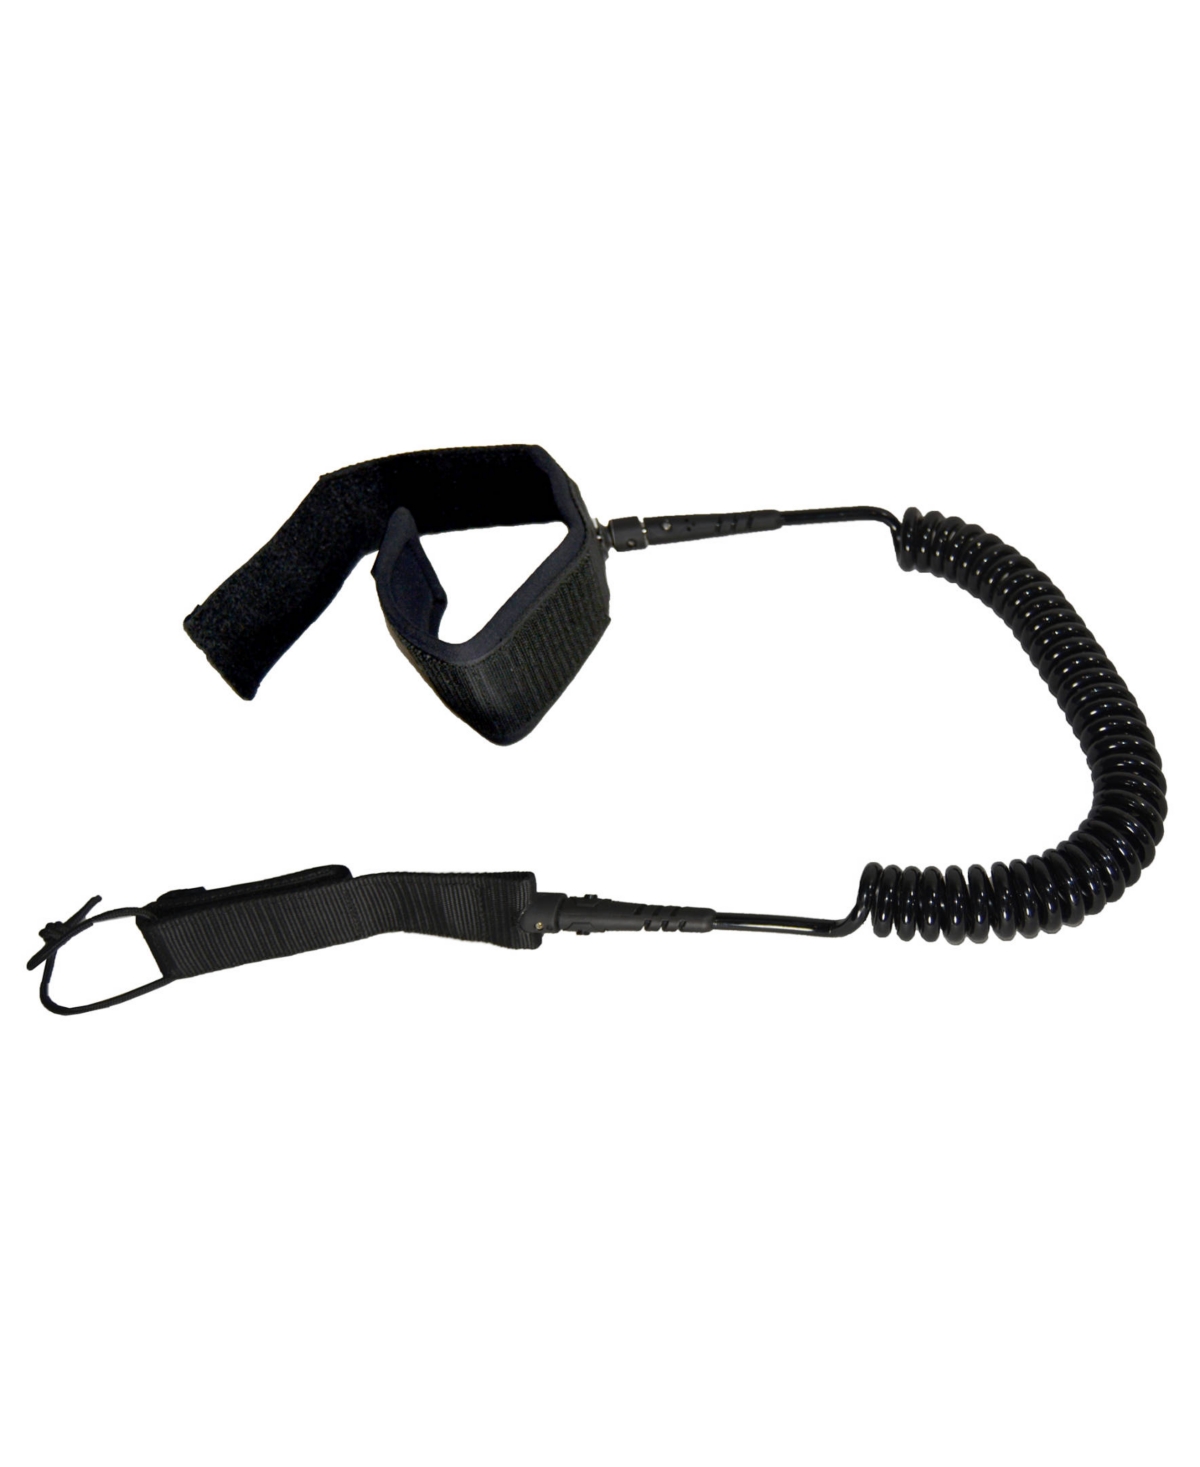 Sports Stand Up Paddle Board Leash - Black